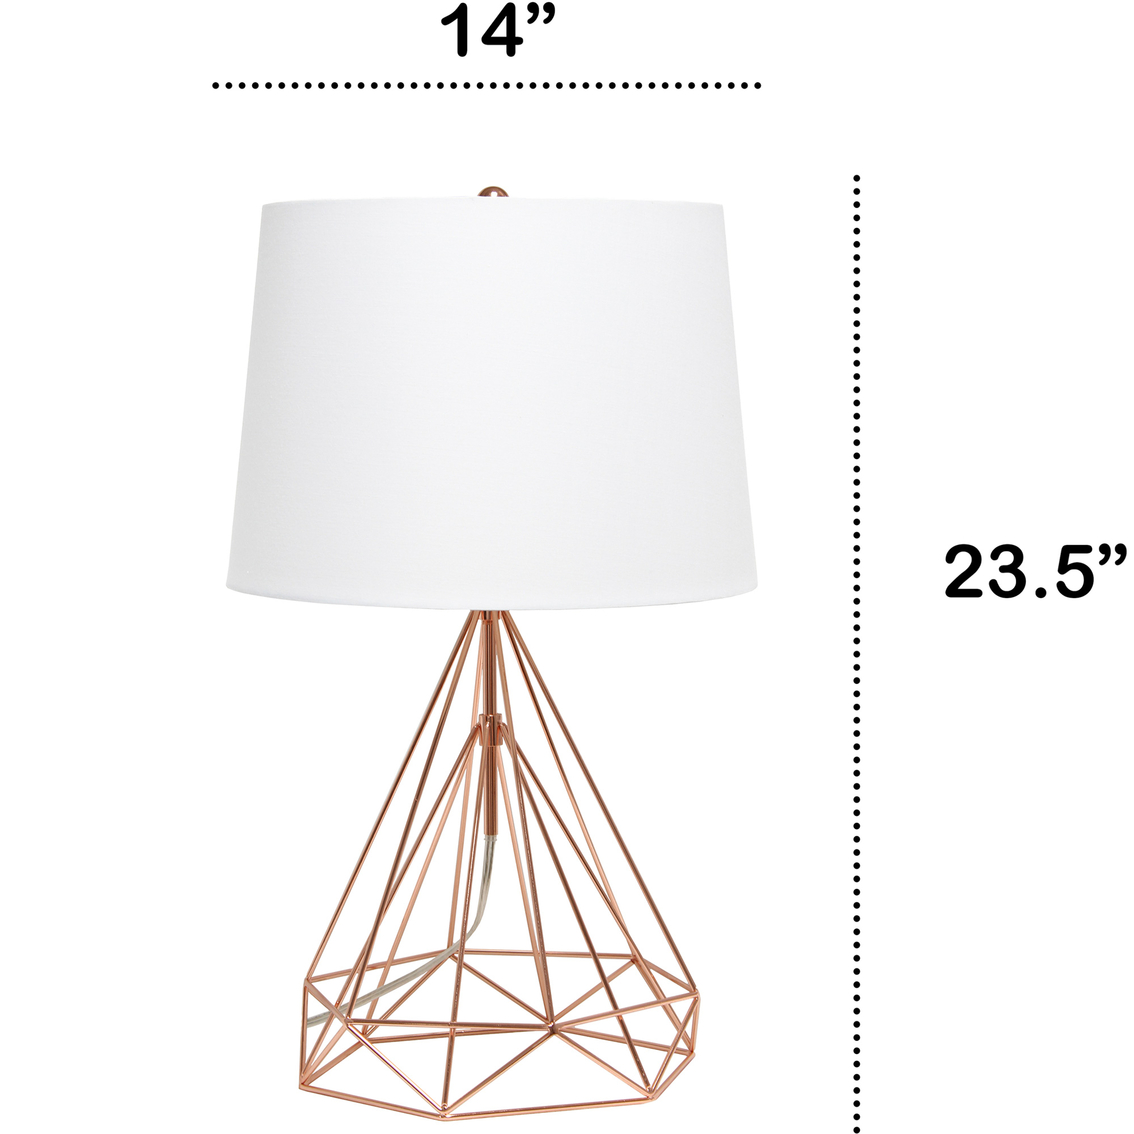 Lalia Home 23.5 in. Geometric Matte Wired Table Lamp with Fabric Shade - Image 8 of 8